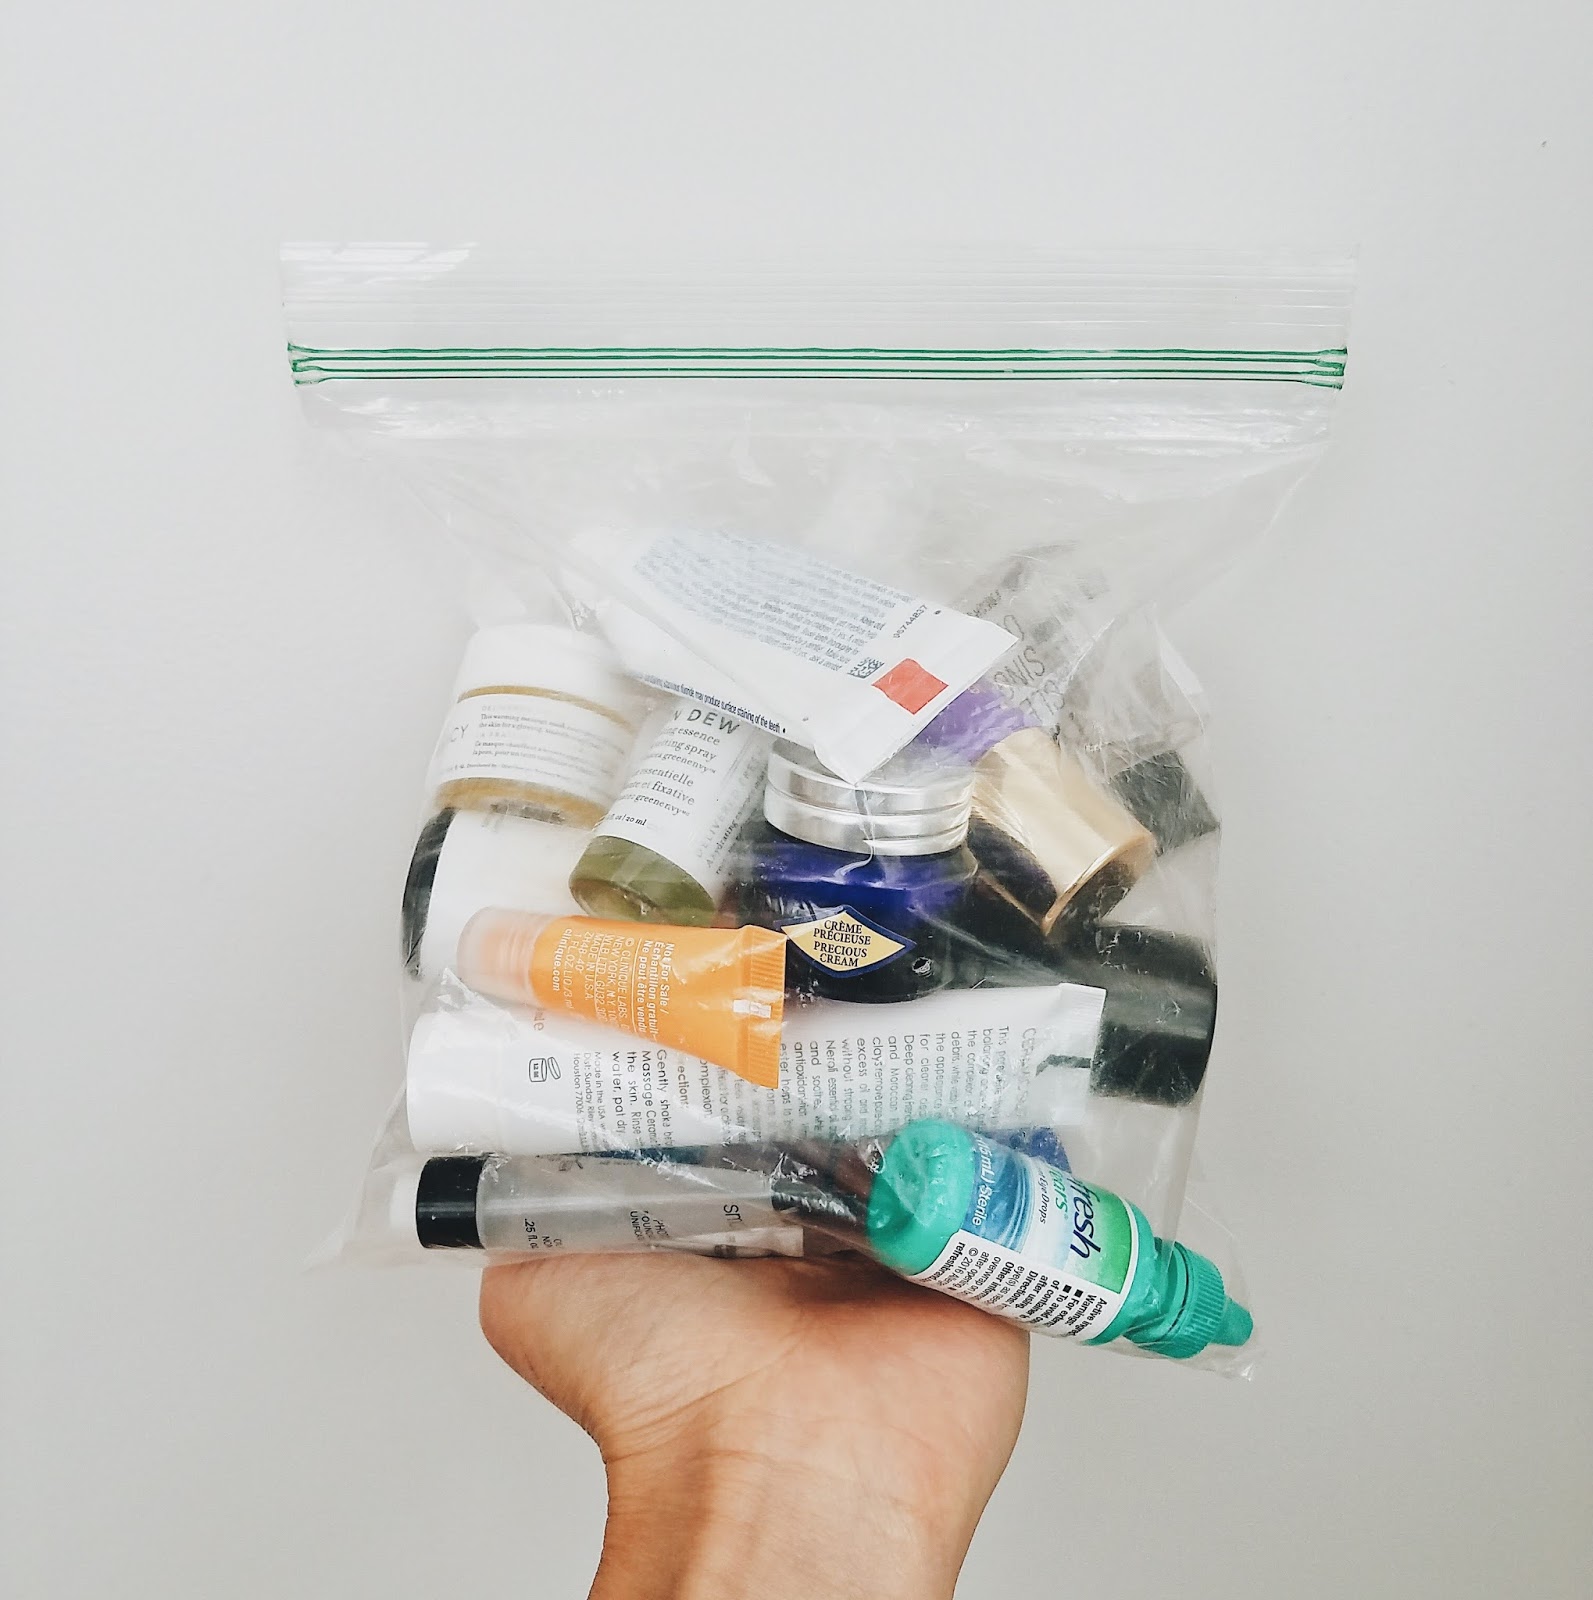 Evidence of The Jen Project's travel skincare products fitting into a quart-sized TSA-approved Ziploc.